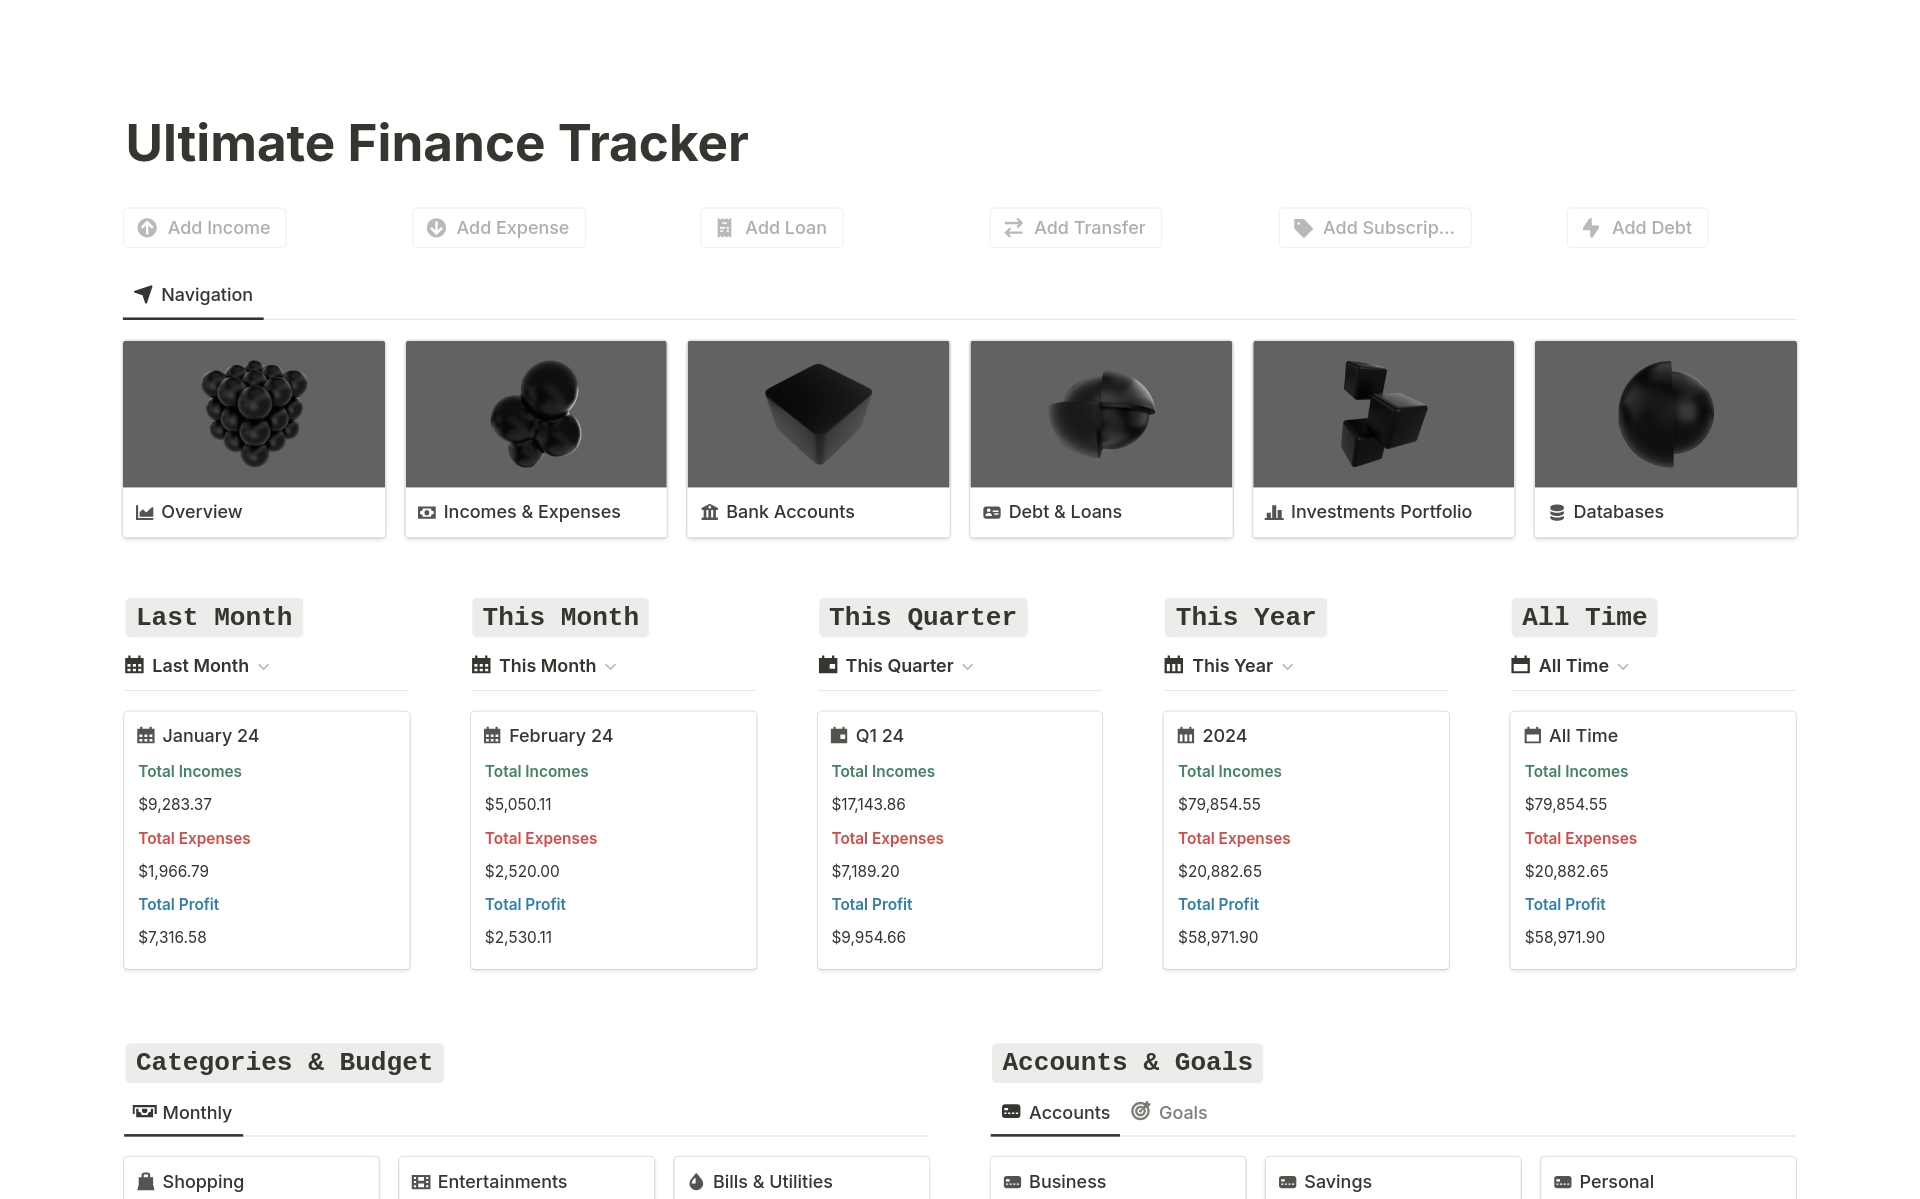 Manage your money easily with Ultimate Finance Tracker for Notion. Track spending, save more, and see all your finances in one place. Ideal for everyday budgeting and business finance. Start sorting your cash and reaching your money goals simply.